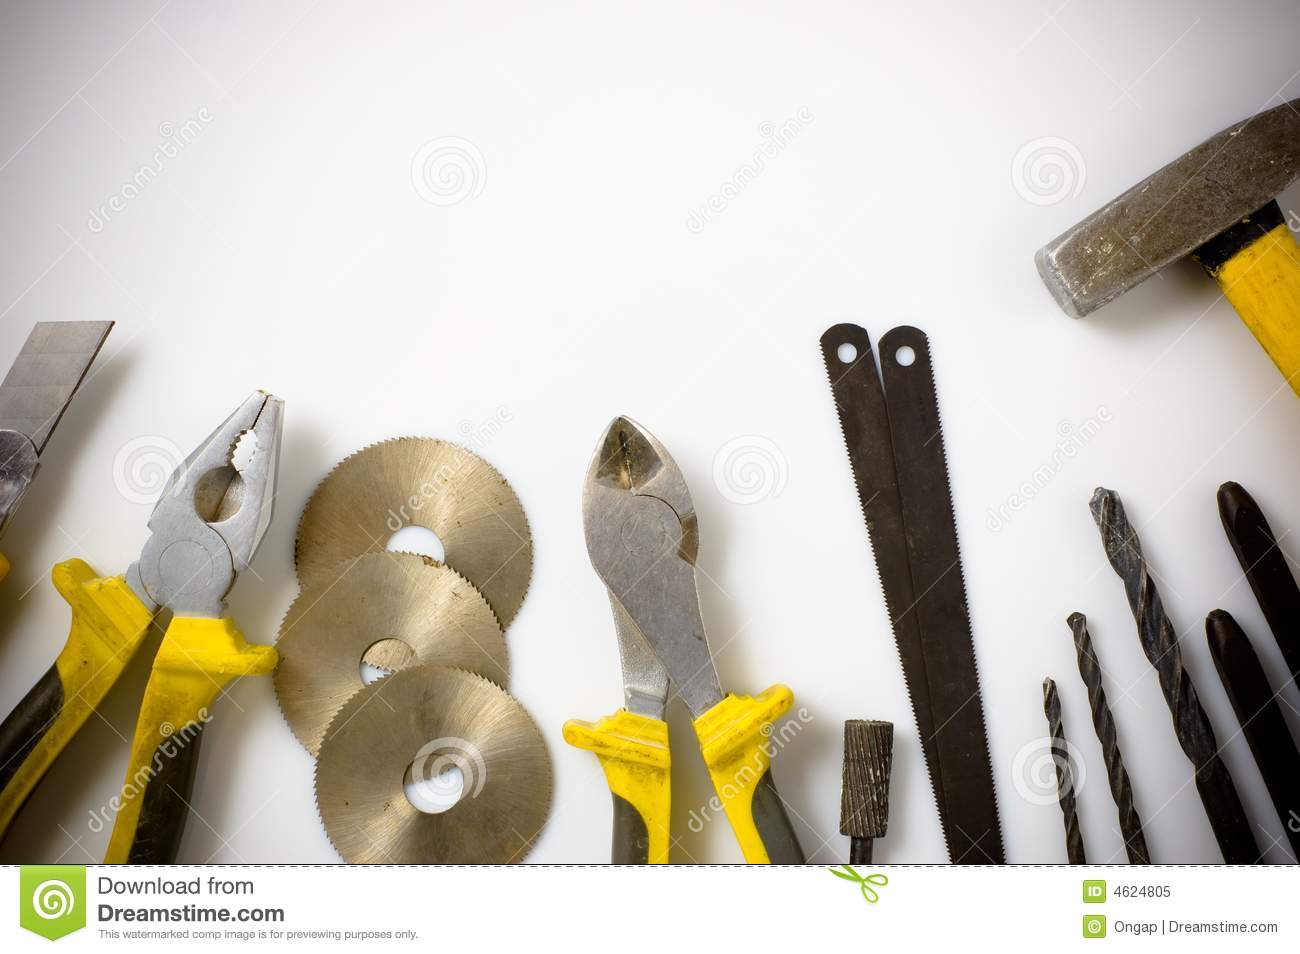 Free Stock Images Home Improvement